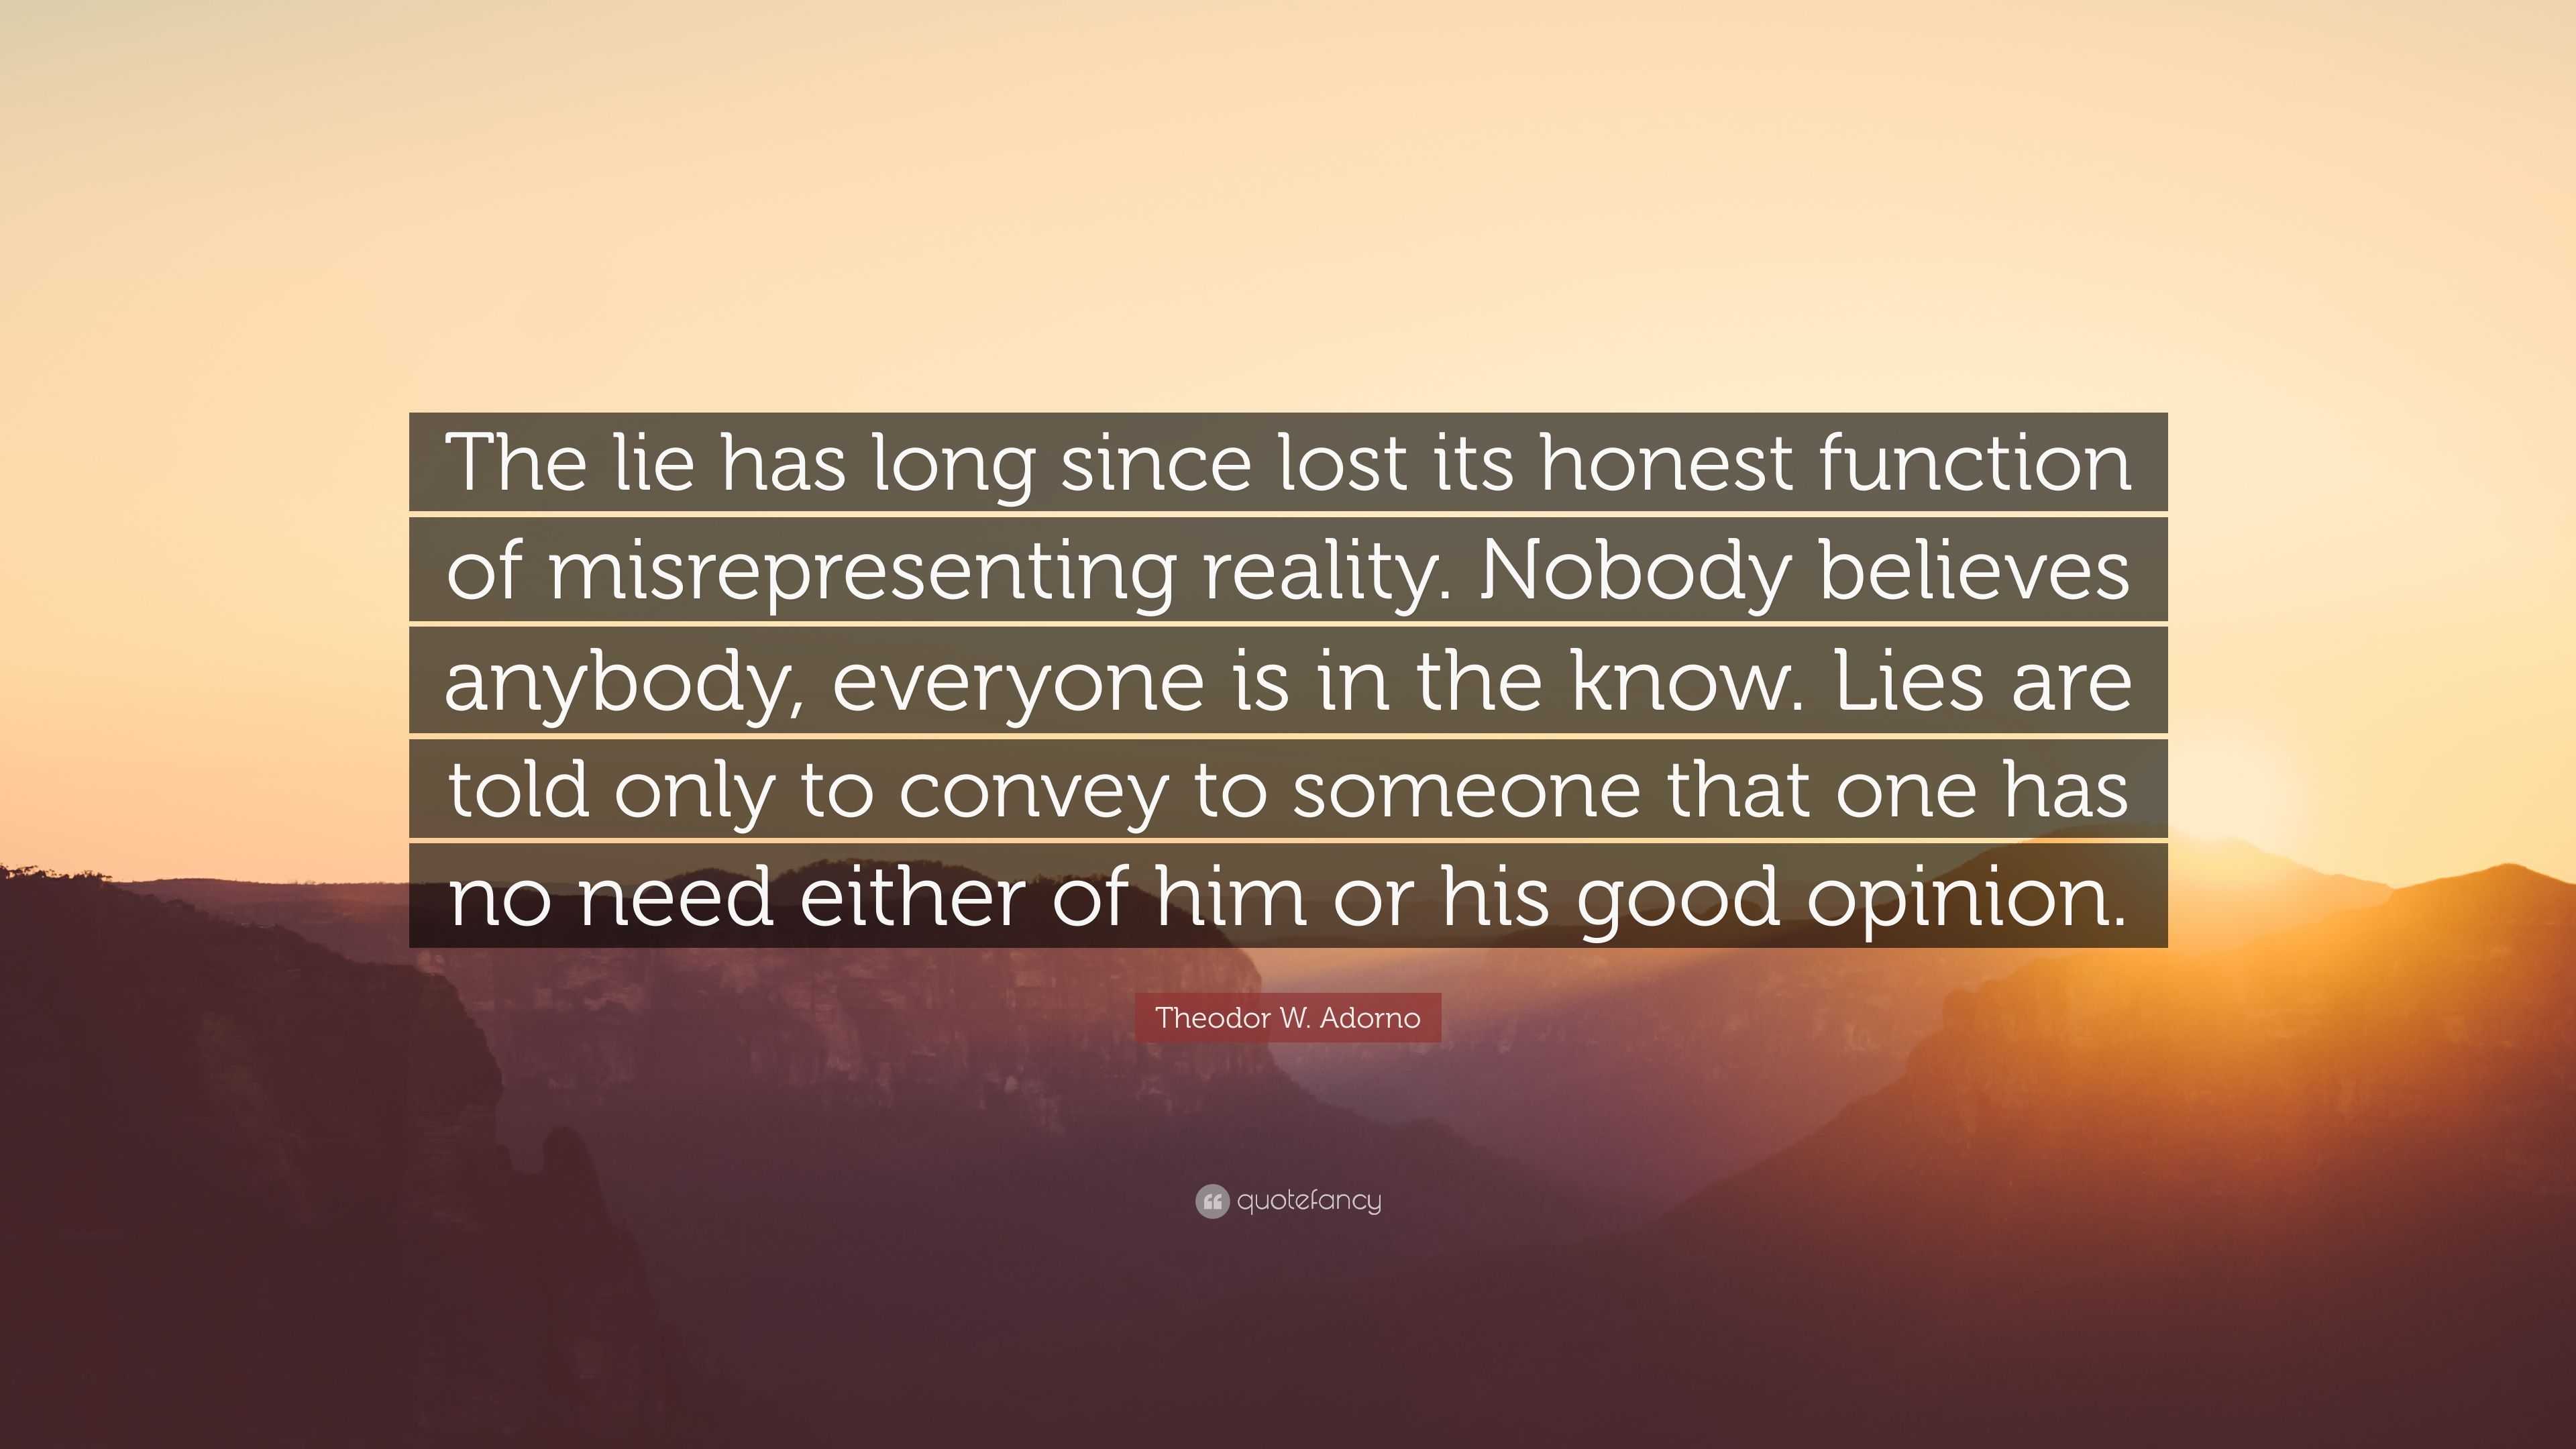 Theodor W. Adorno Quote: “The lie has long since lost its honest ...